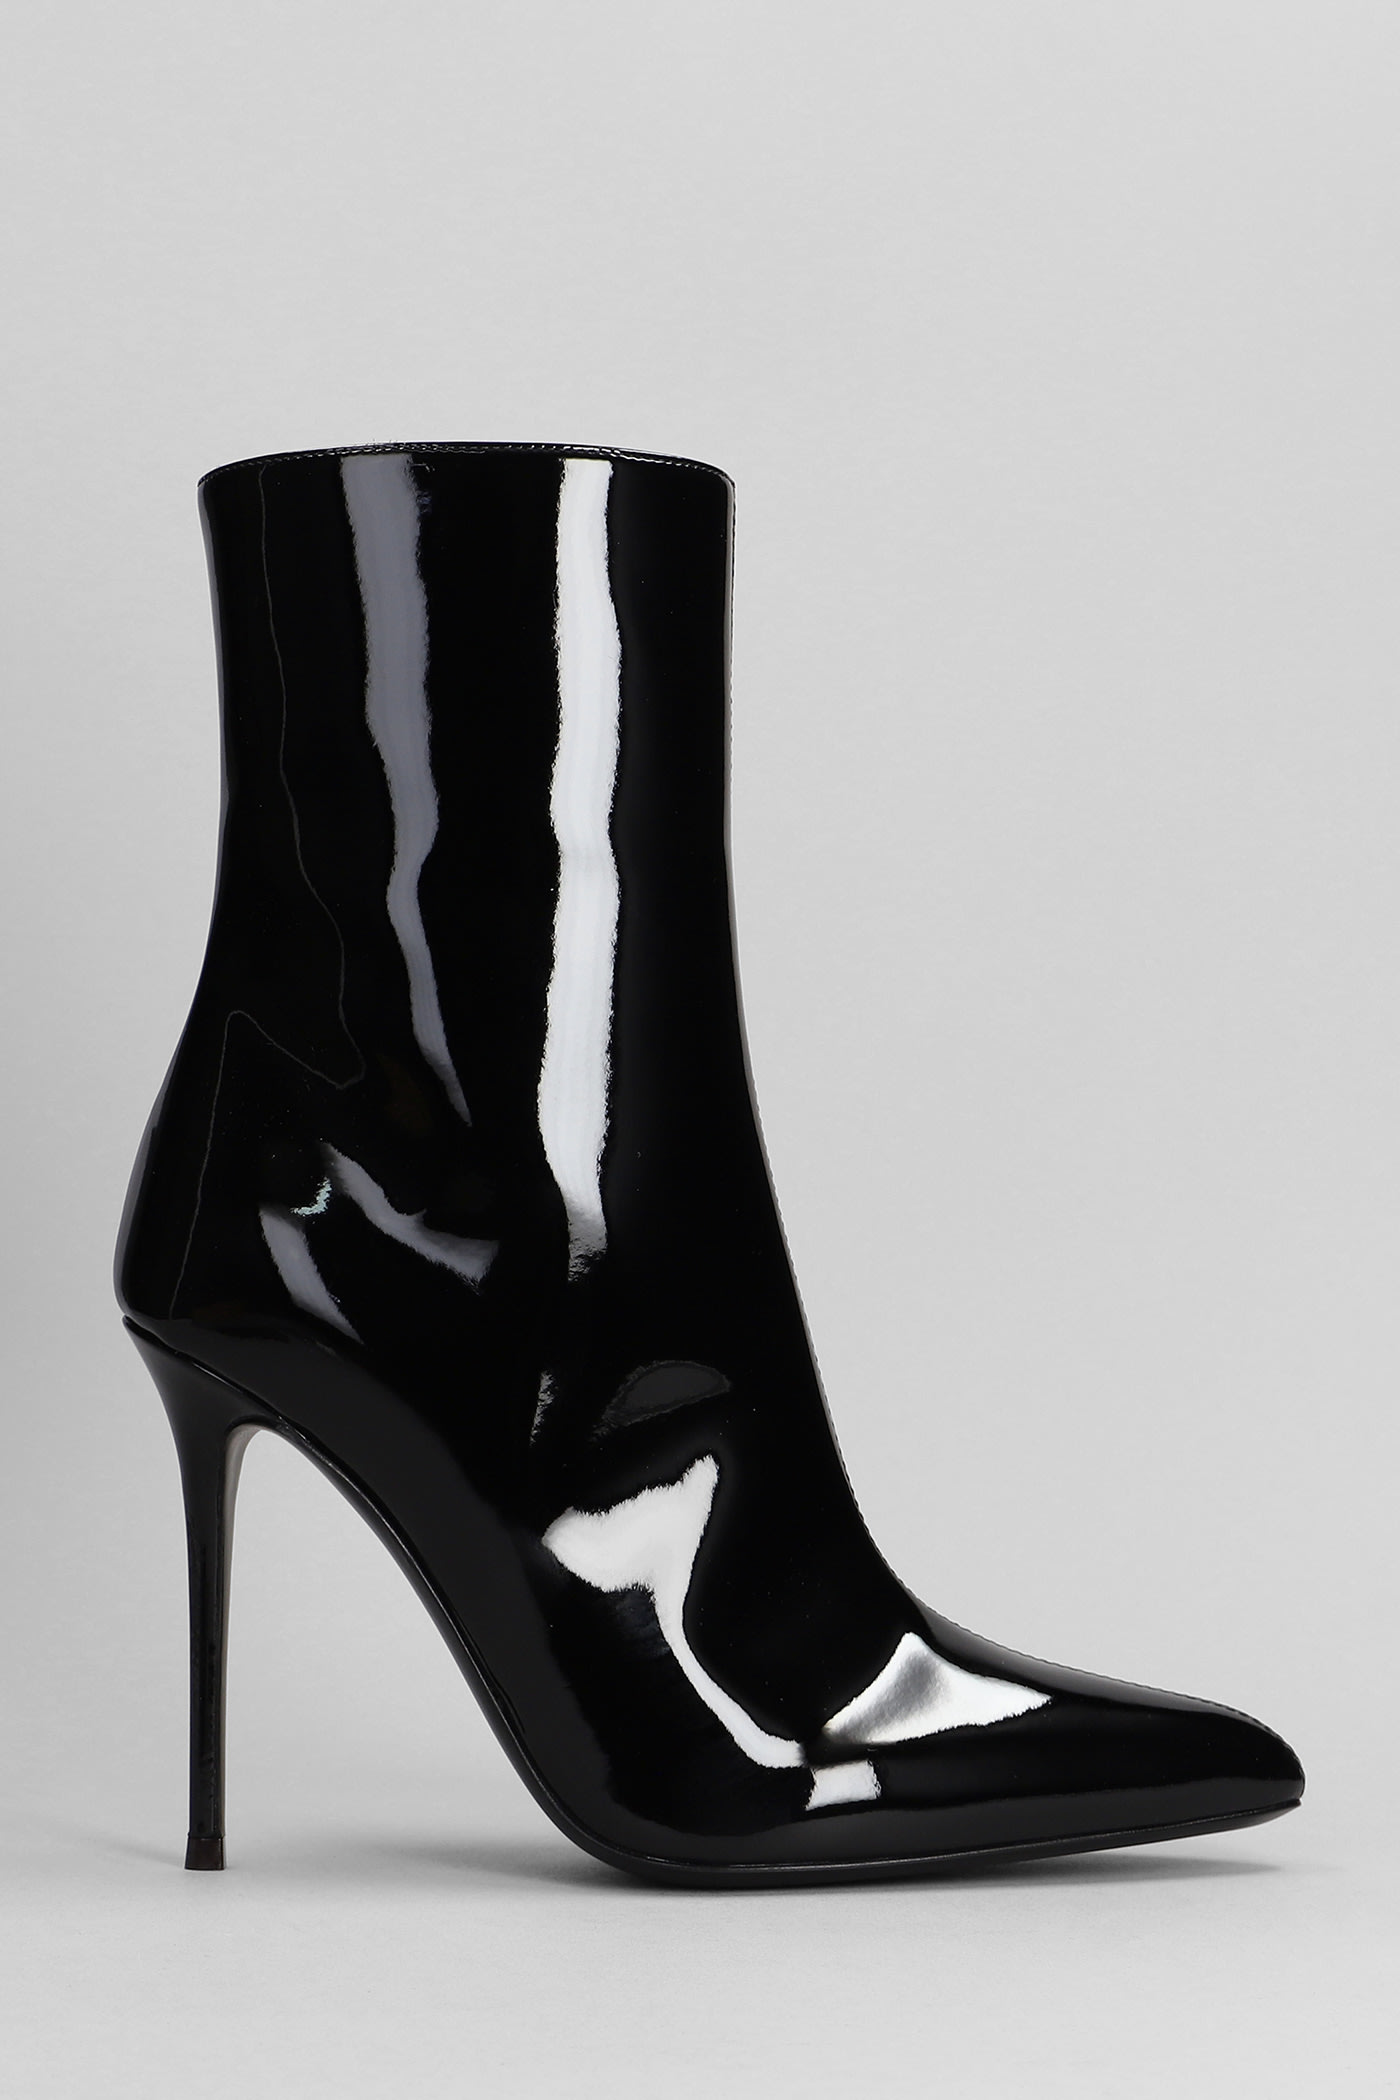 Giuseppe Zanotti Brytta High Heels Ankle Boots In Black Patent Leather In 黑色